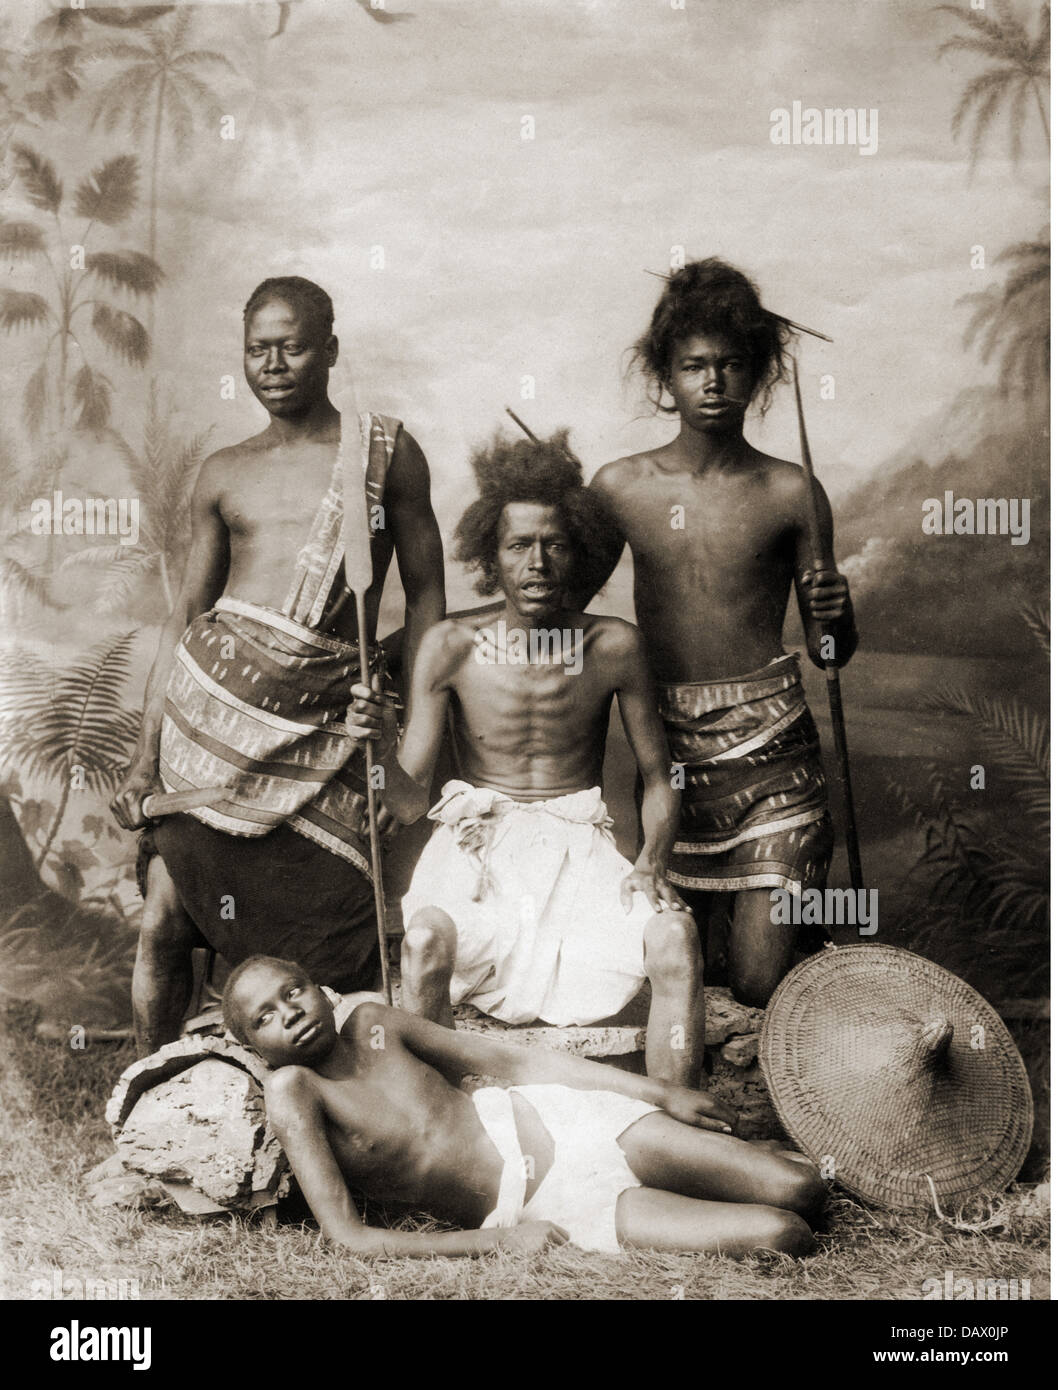 geography / travel, Africa, Egypt or Sudan, people, warriors, photo by H. Arnoux, second half of the 19th century, man, men, spear, spears, weapons, arms, weapon, arm, group picture, ethnic group, ethnic groups, ethnicities, ethnology, ethnicity, ethnic, Black African, Africans, historic, historical, shield, shields, knife, knives, male, Additional-Rights-Clearences-Not Available Stock Photo